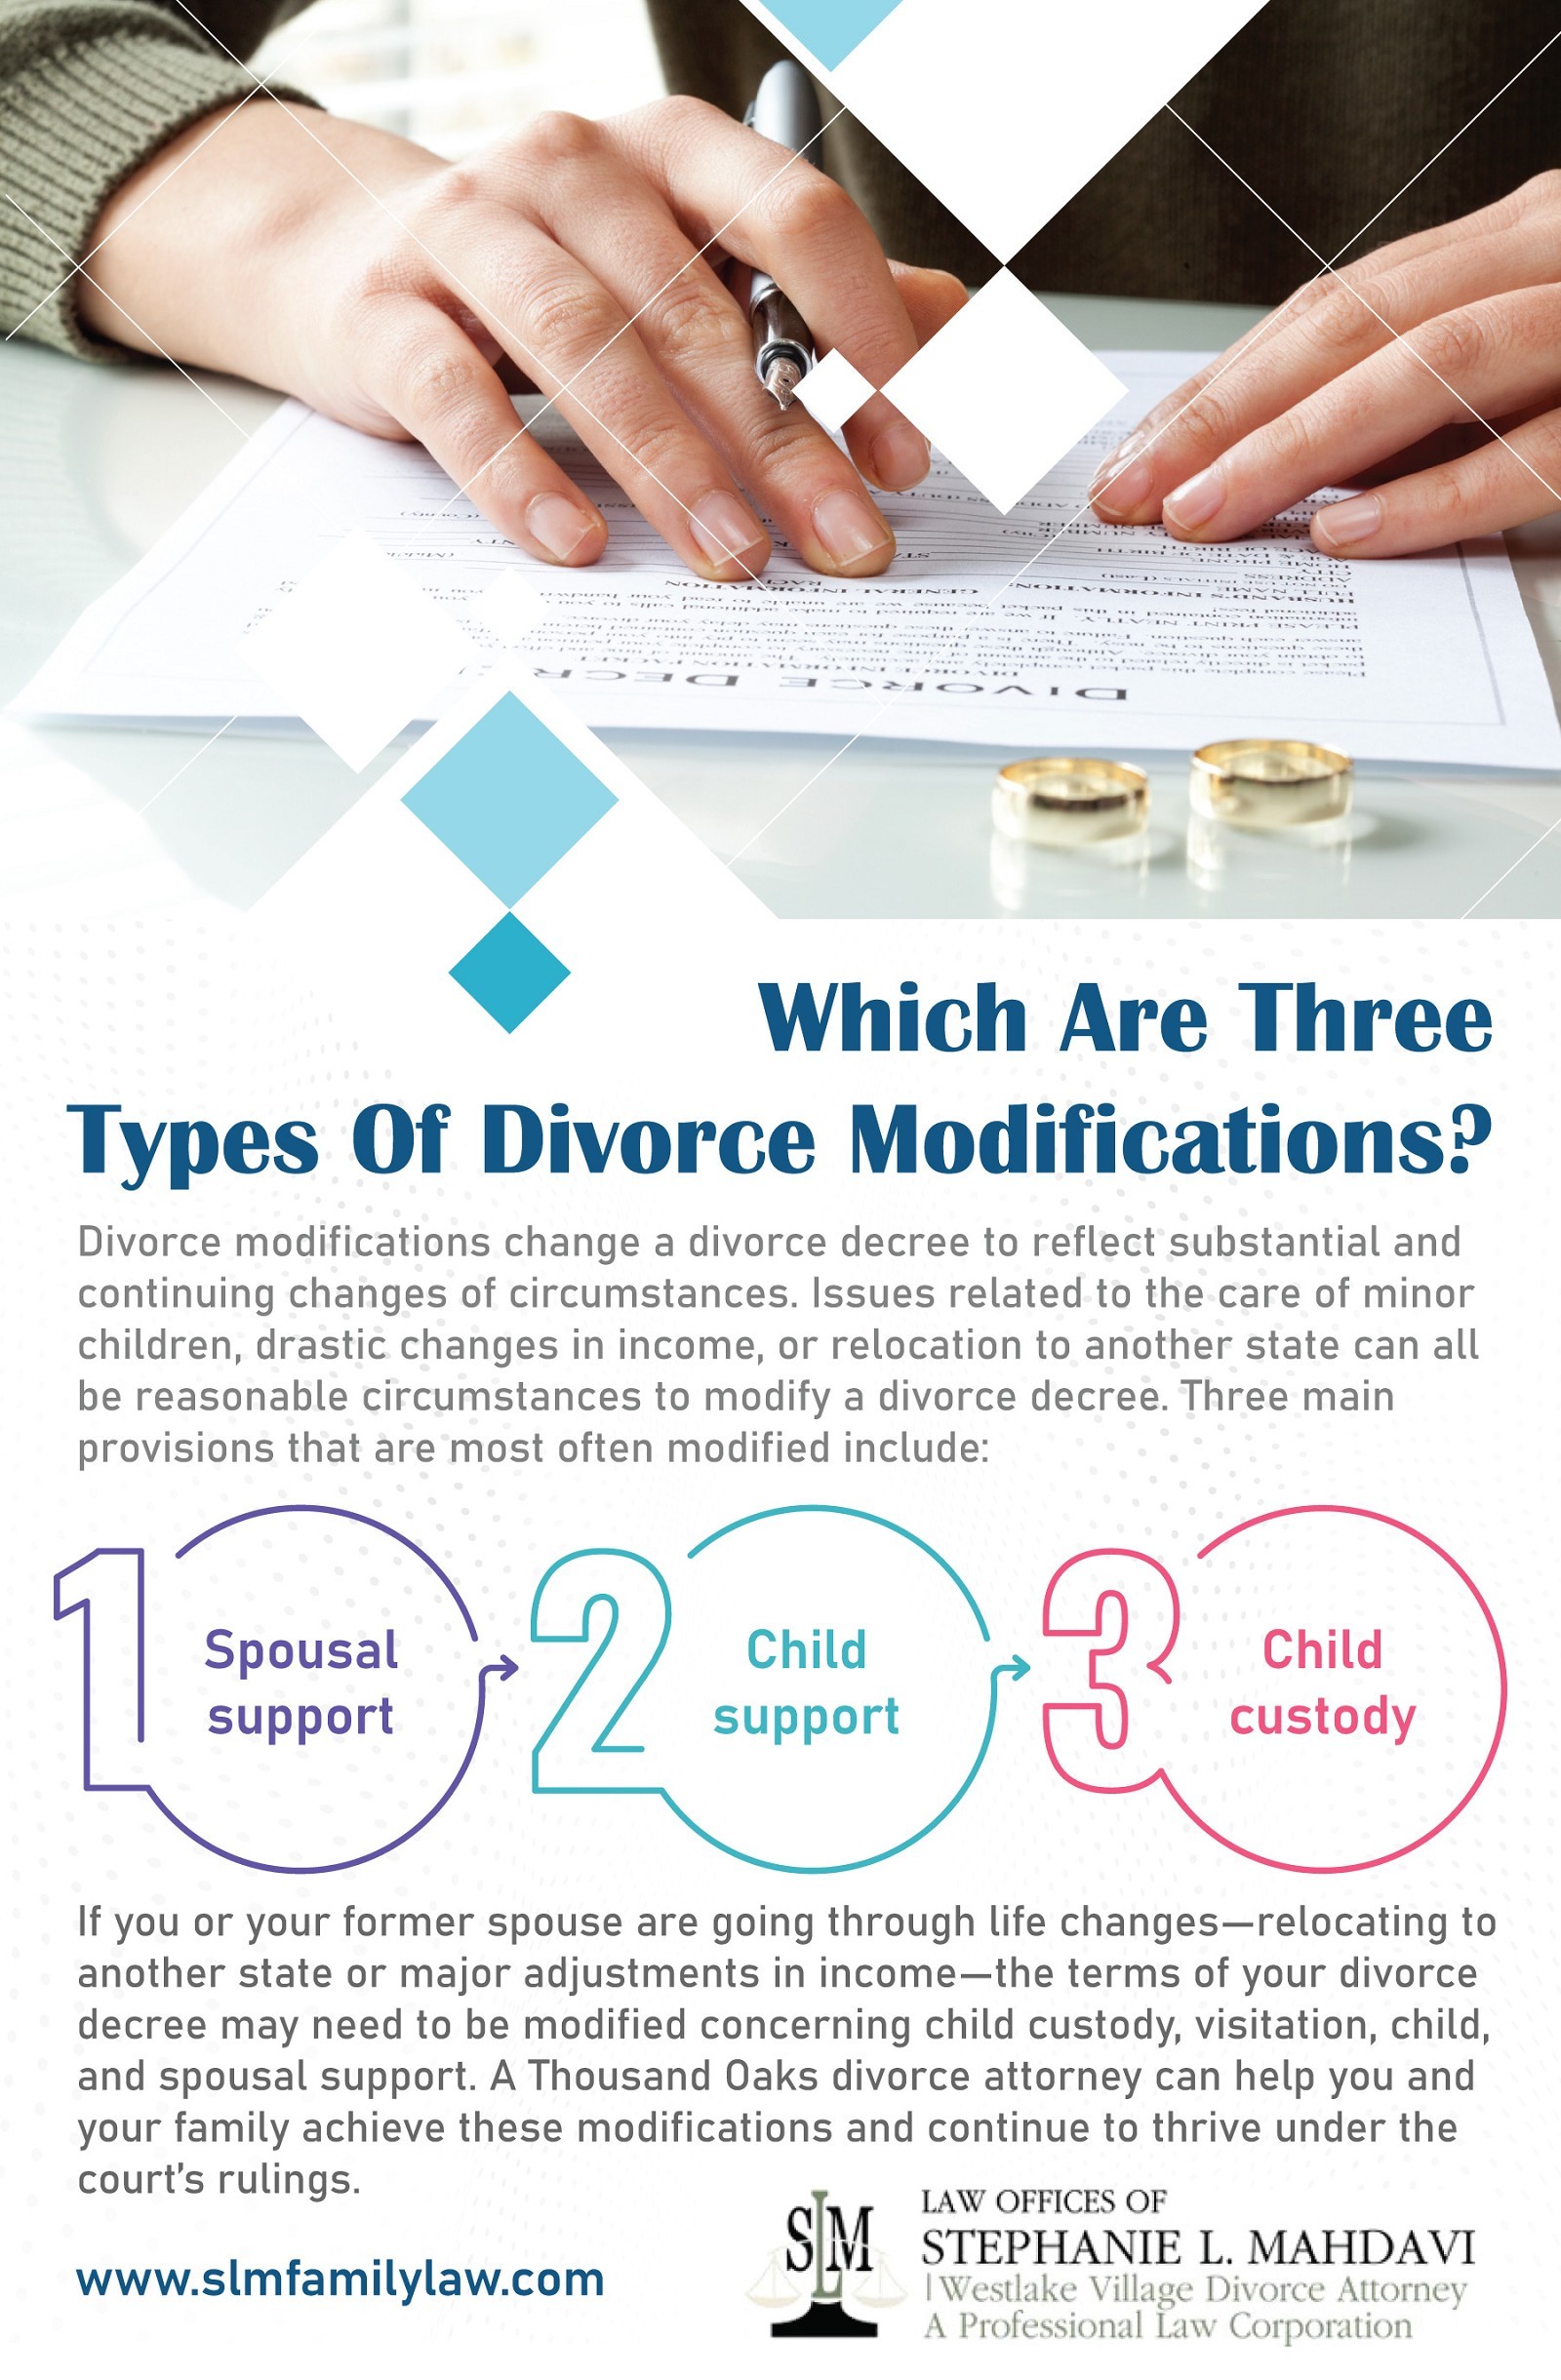 Which Are Three Types Of Divorce Modifications?